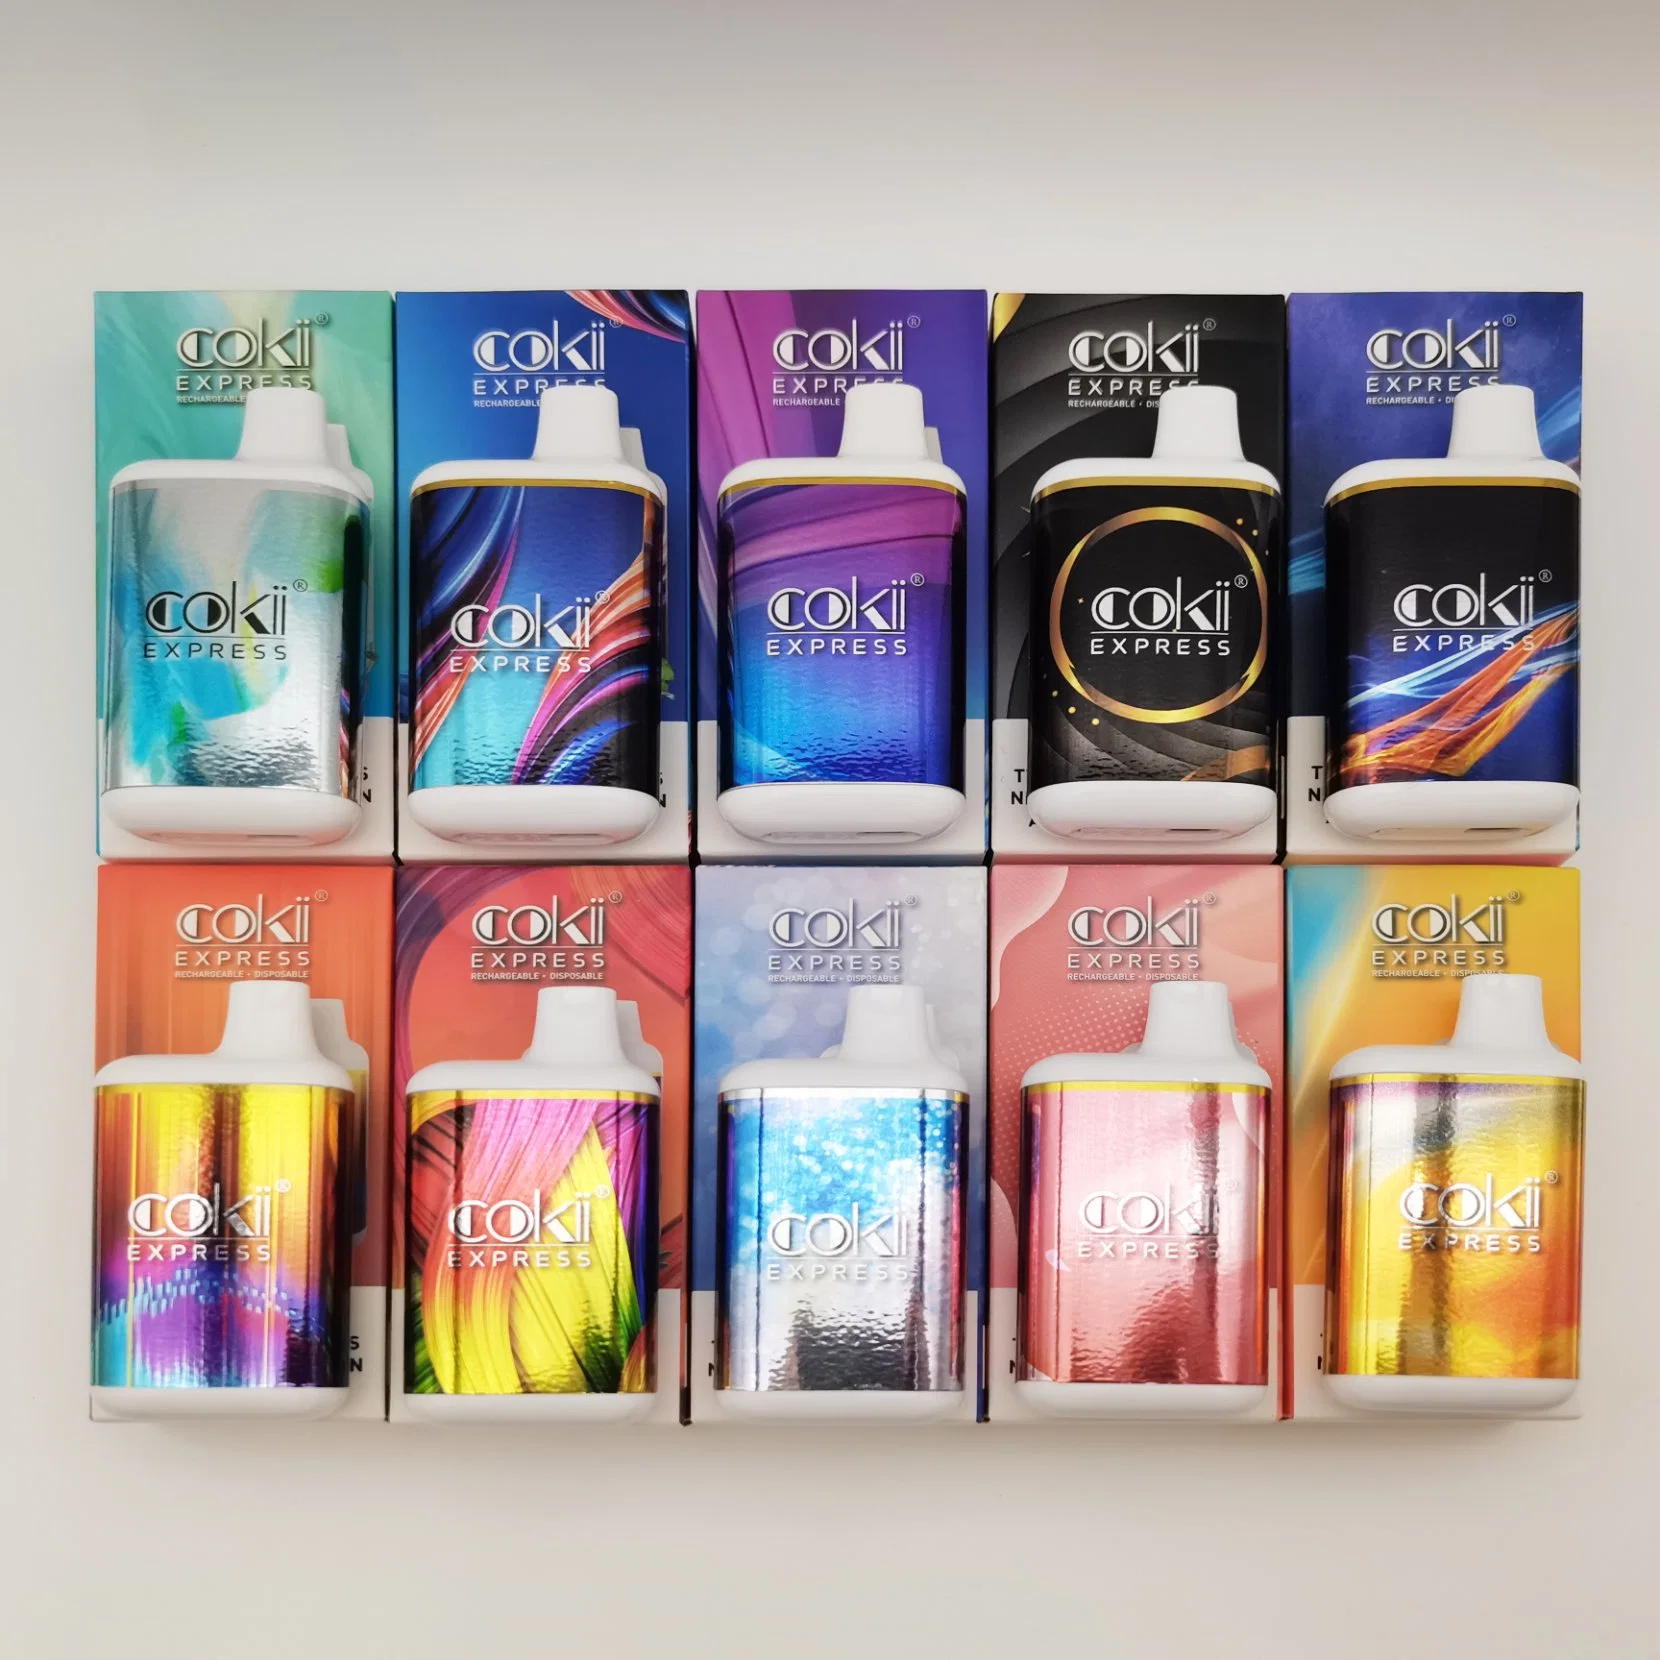 Best Cokii Vape Nicotine Free 3500 5000 Puffs Shenzhen Distributor Electric Cigarettes Disposable/Chargeable China Wholesale/Supplier E Electronic Cigarette Electronic Smoke